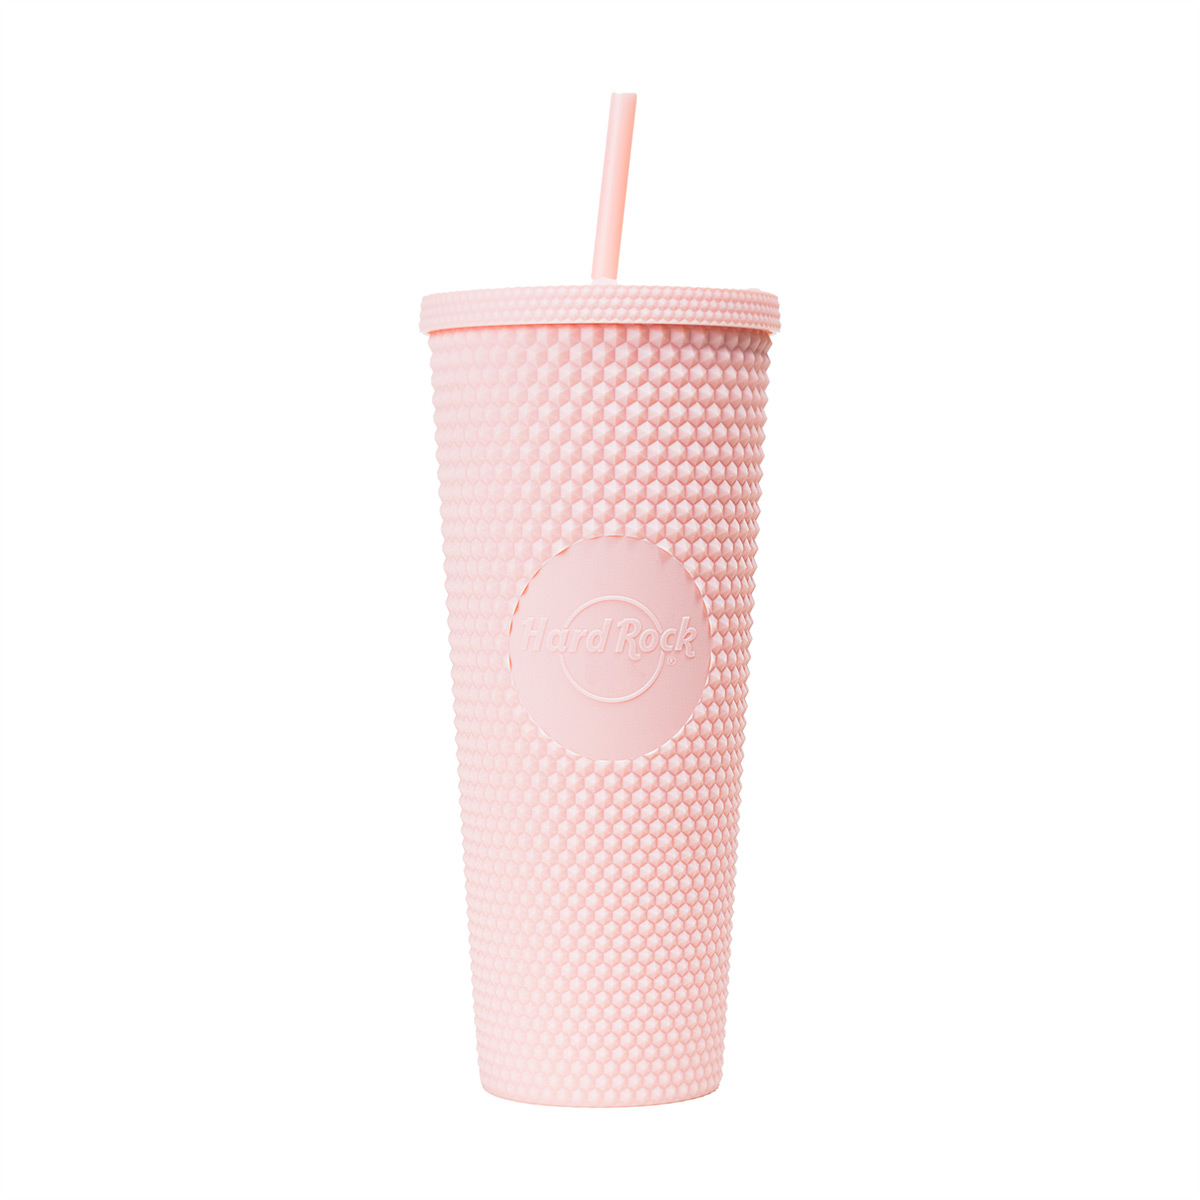 Hard Rock Pop of Color Tumbler with Straw in Pink 24oz image number 2